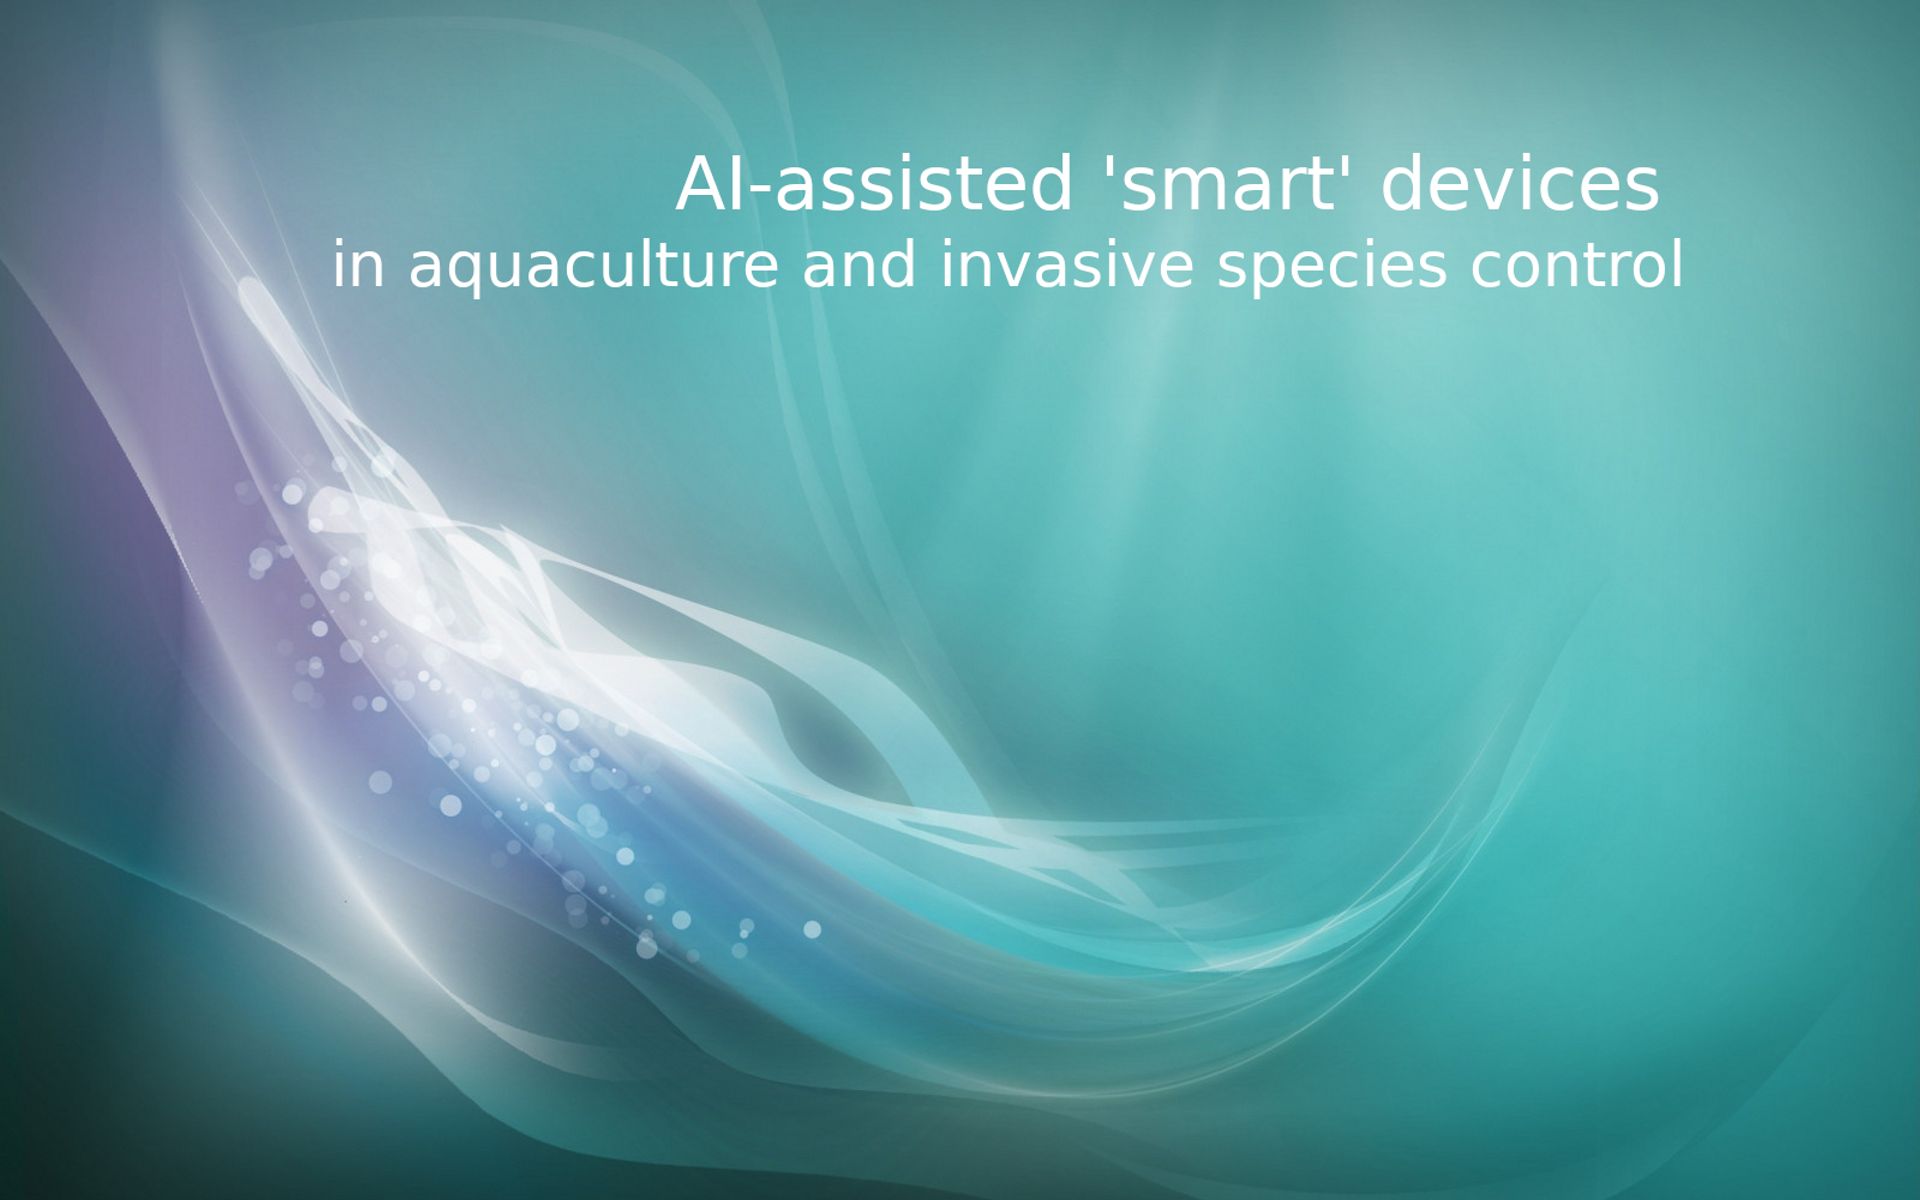 Radmantis: AI-assisted 'smart' devices in aquaculture and invasive